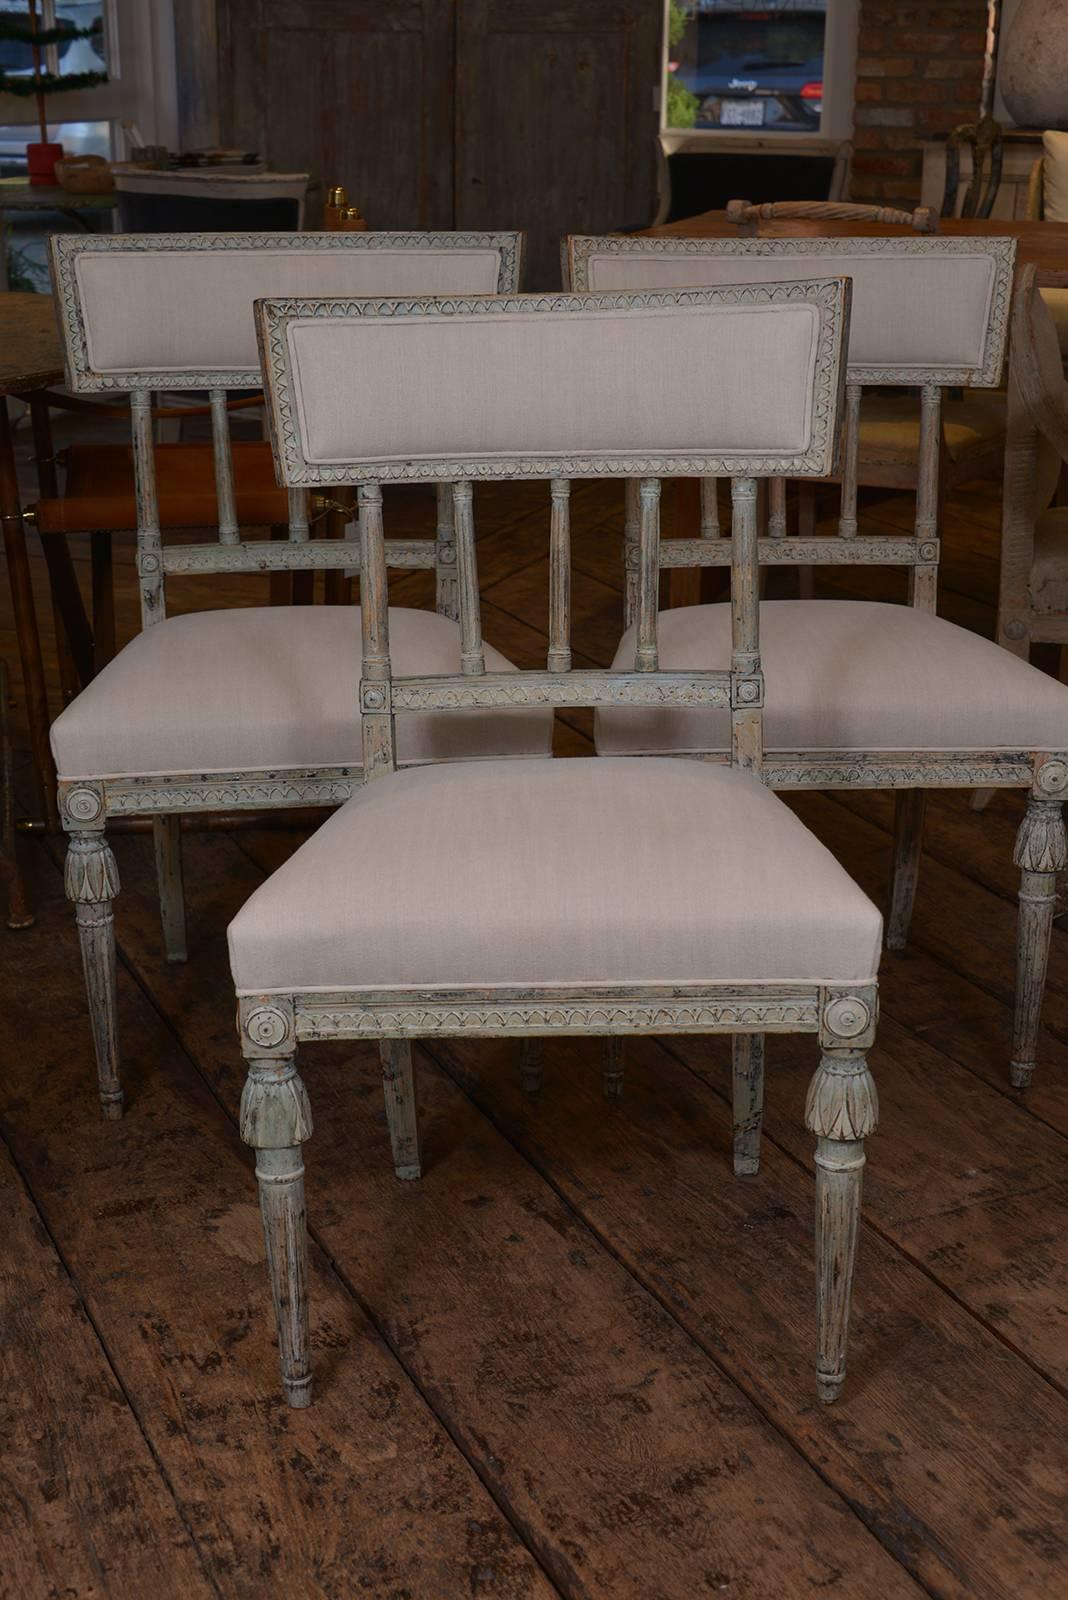 A set of four Swedish Gustavian chairs circa 1810-1815 in original paint. Generous size.